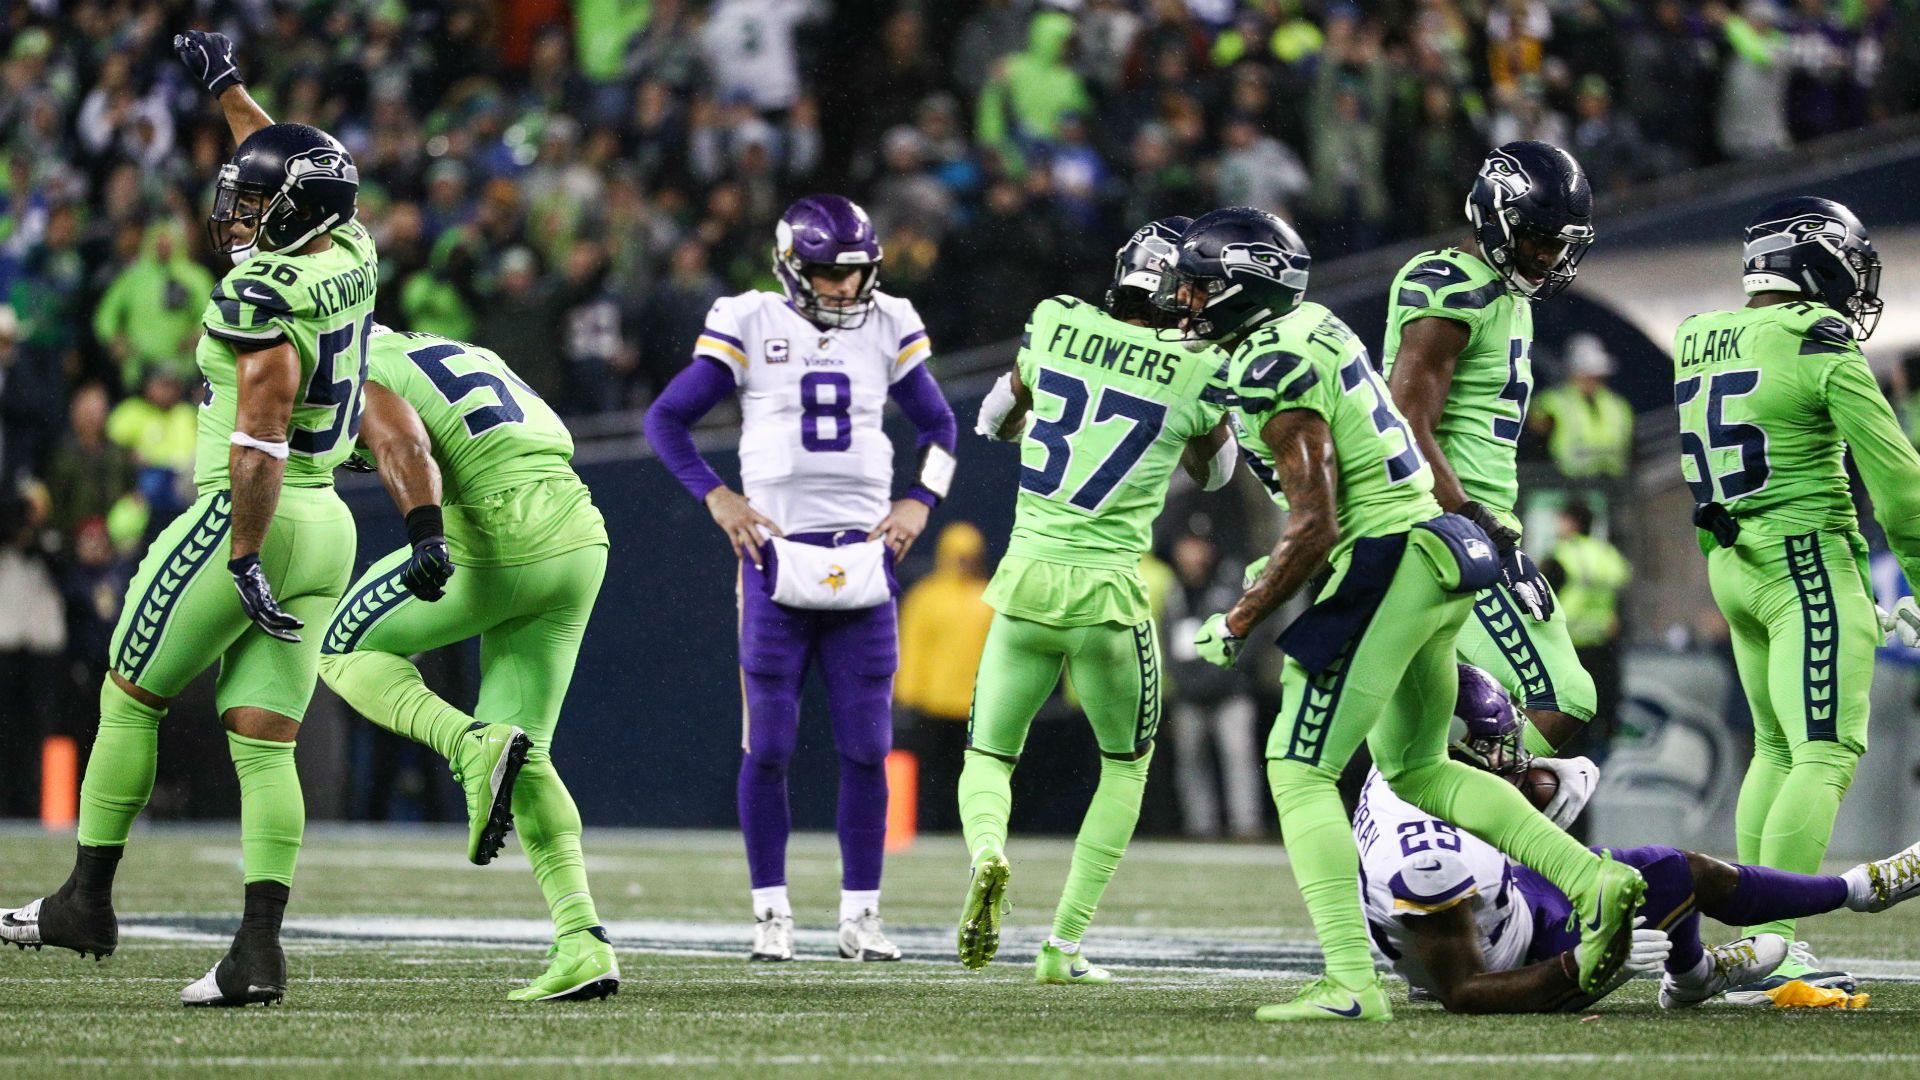 Three takeaways from the Seahawks' dominant win over the Vikings